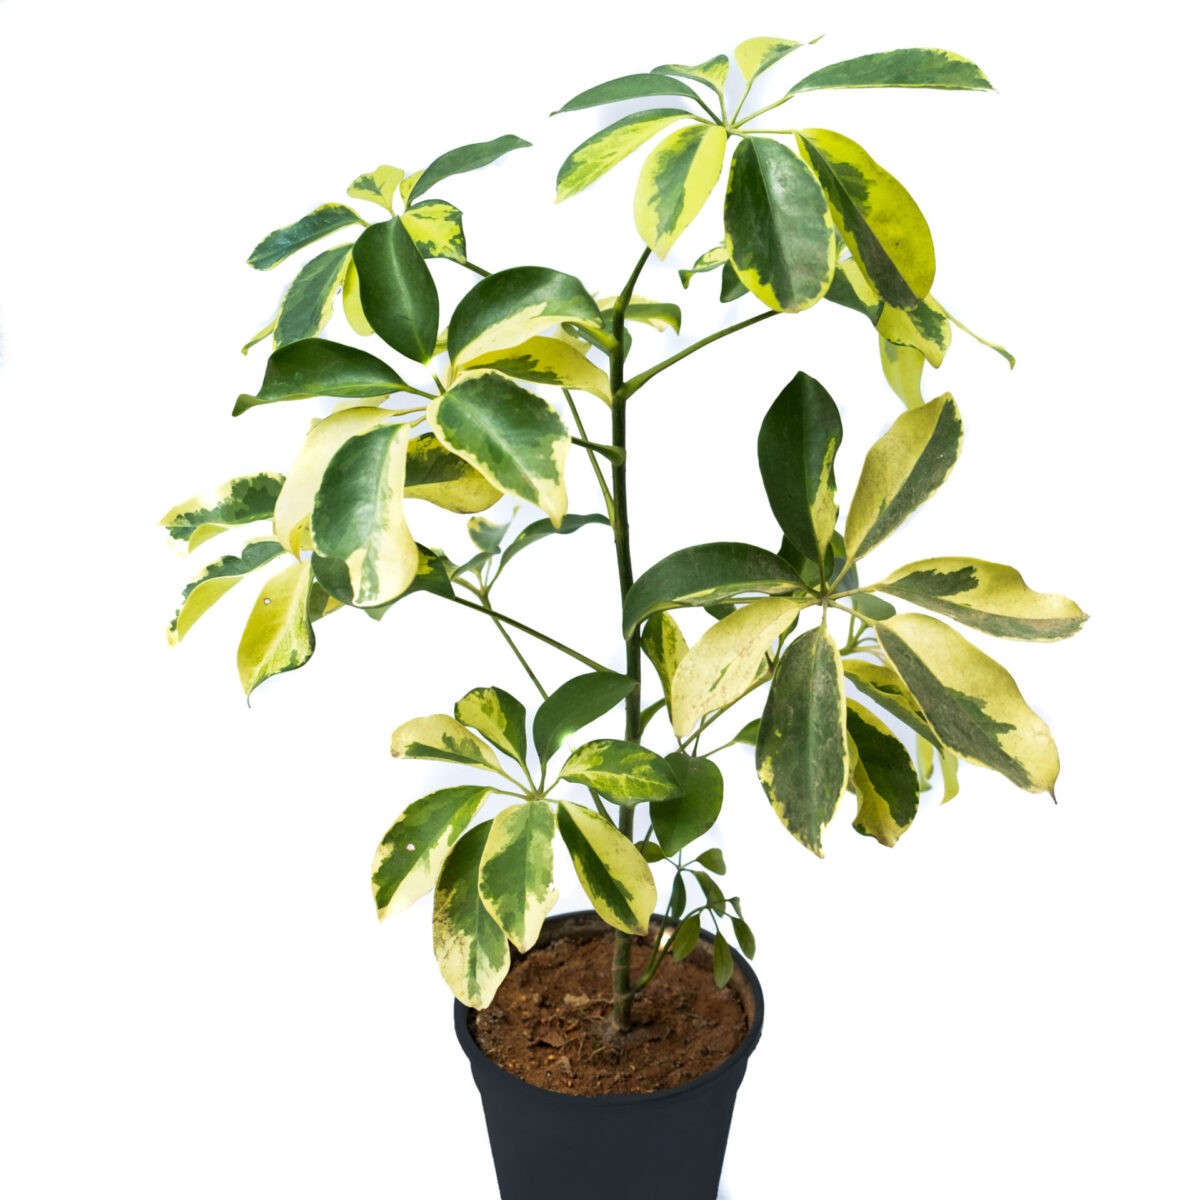 schefflera plant or schefflera variegated is a popular house plant. Availlable for Bangalore delivery